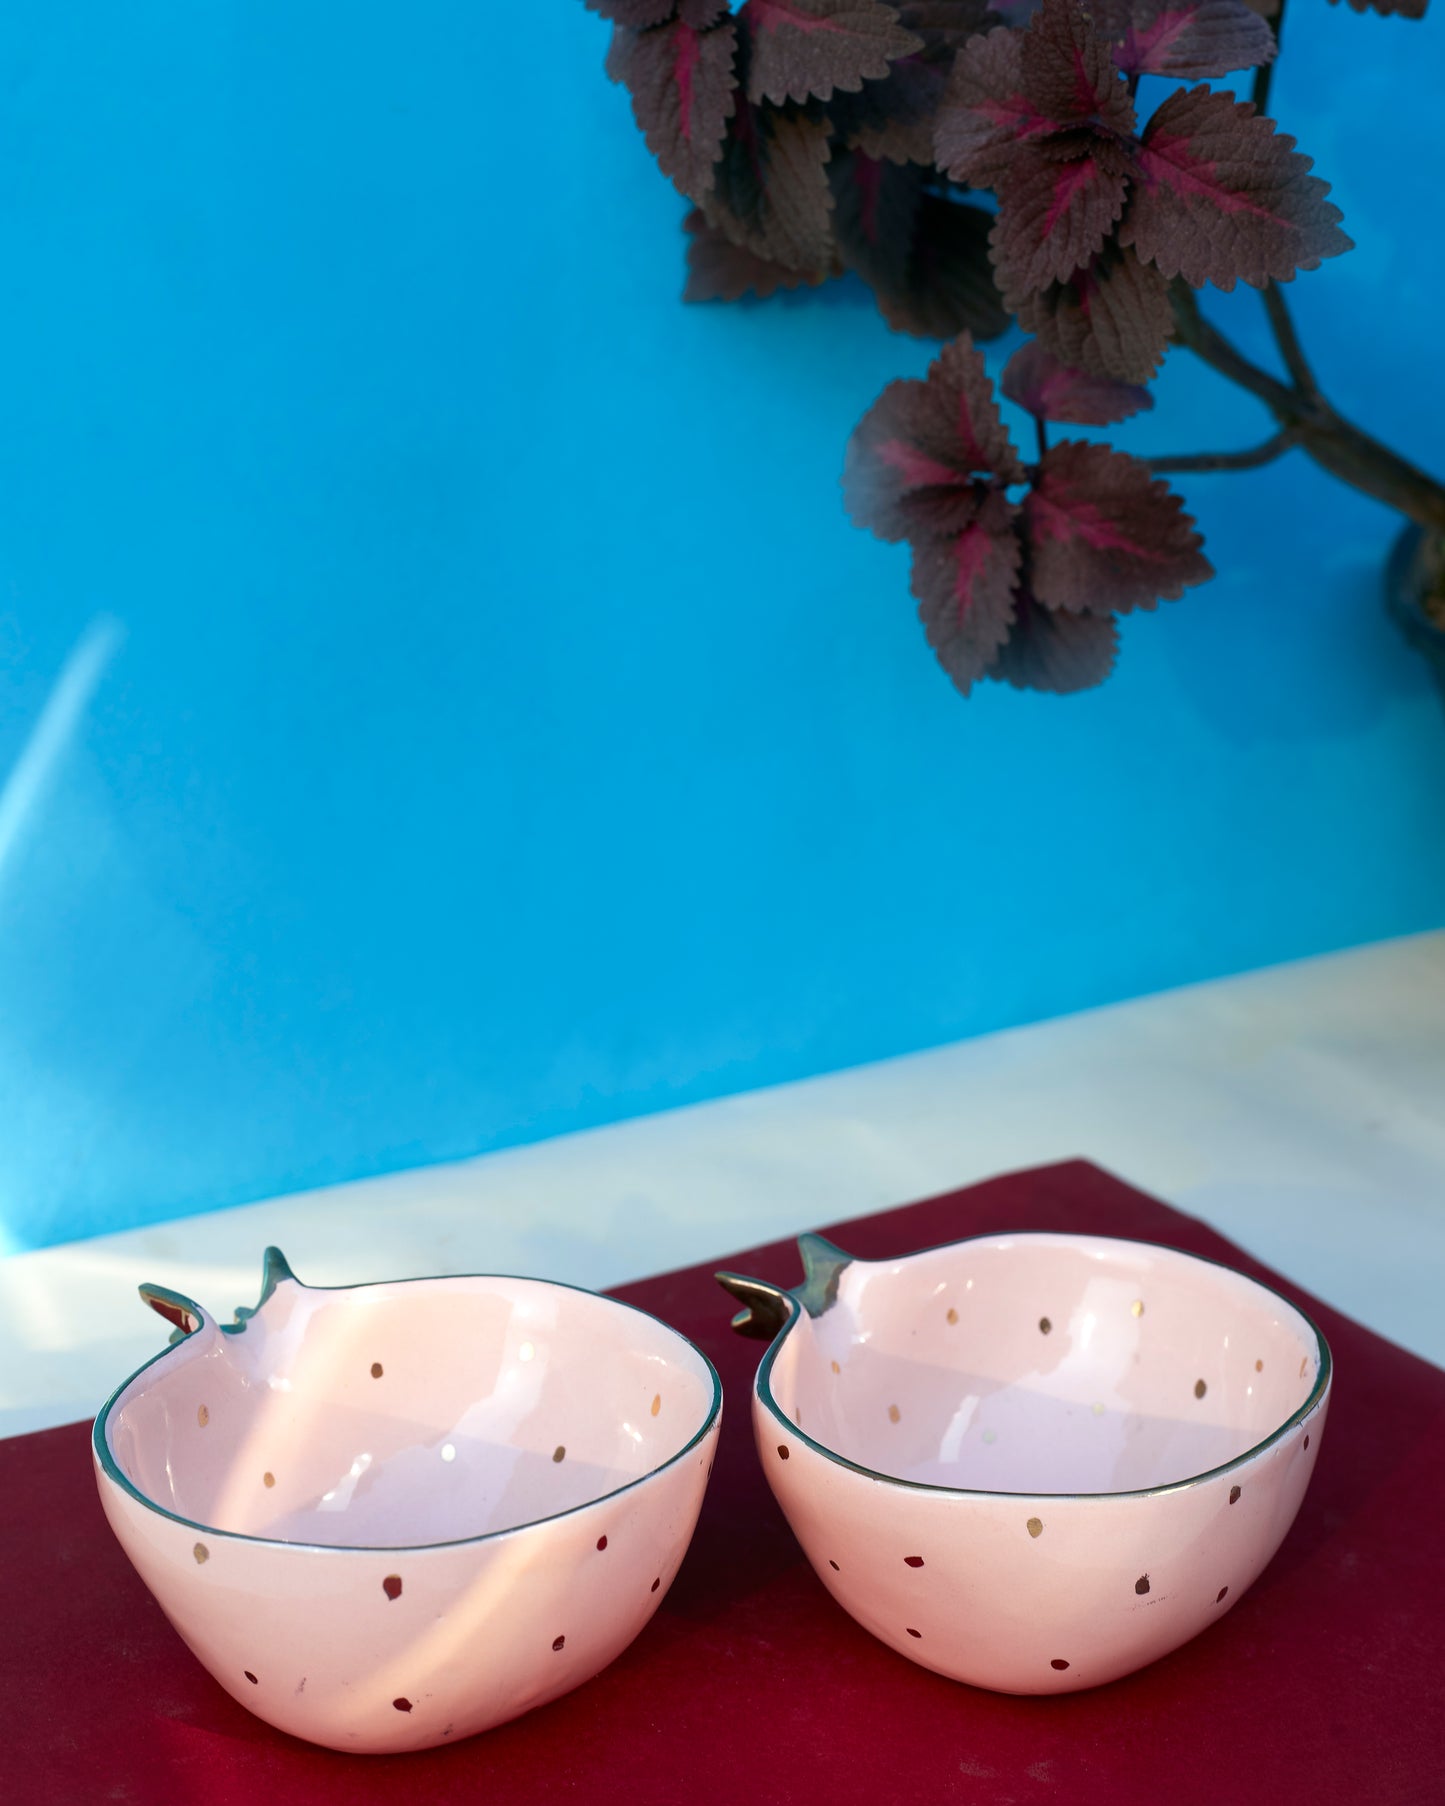 Pink Petals: Set of Pomegranate-Shaped Bowls, A Charming Fusion of Elegance and Whimsy